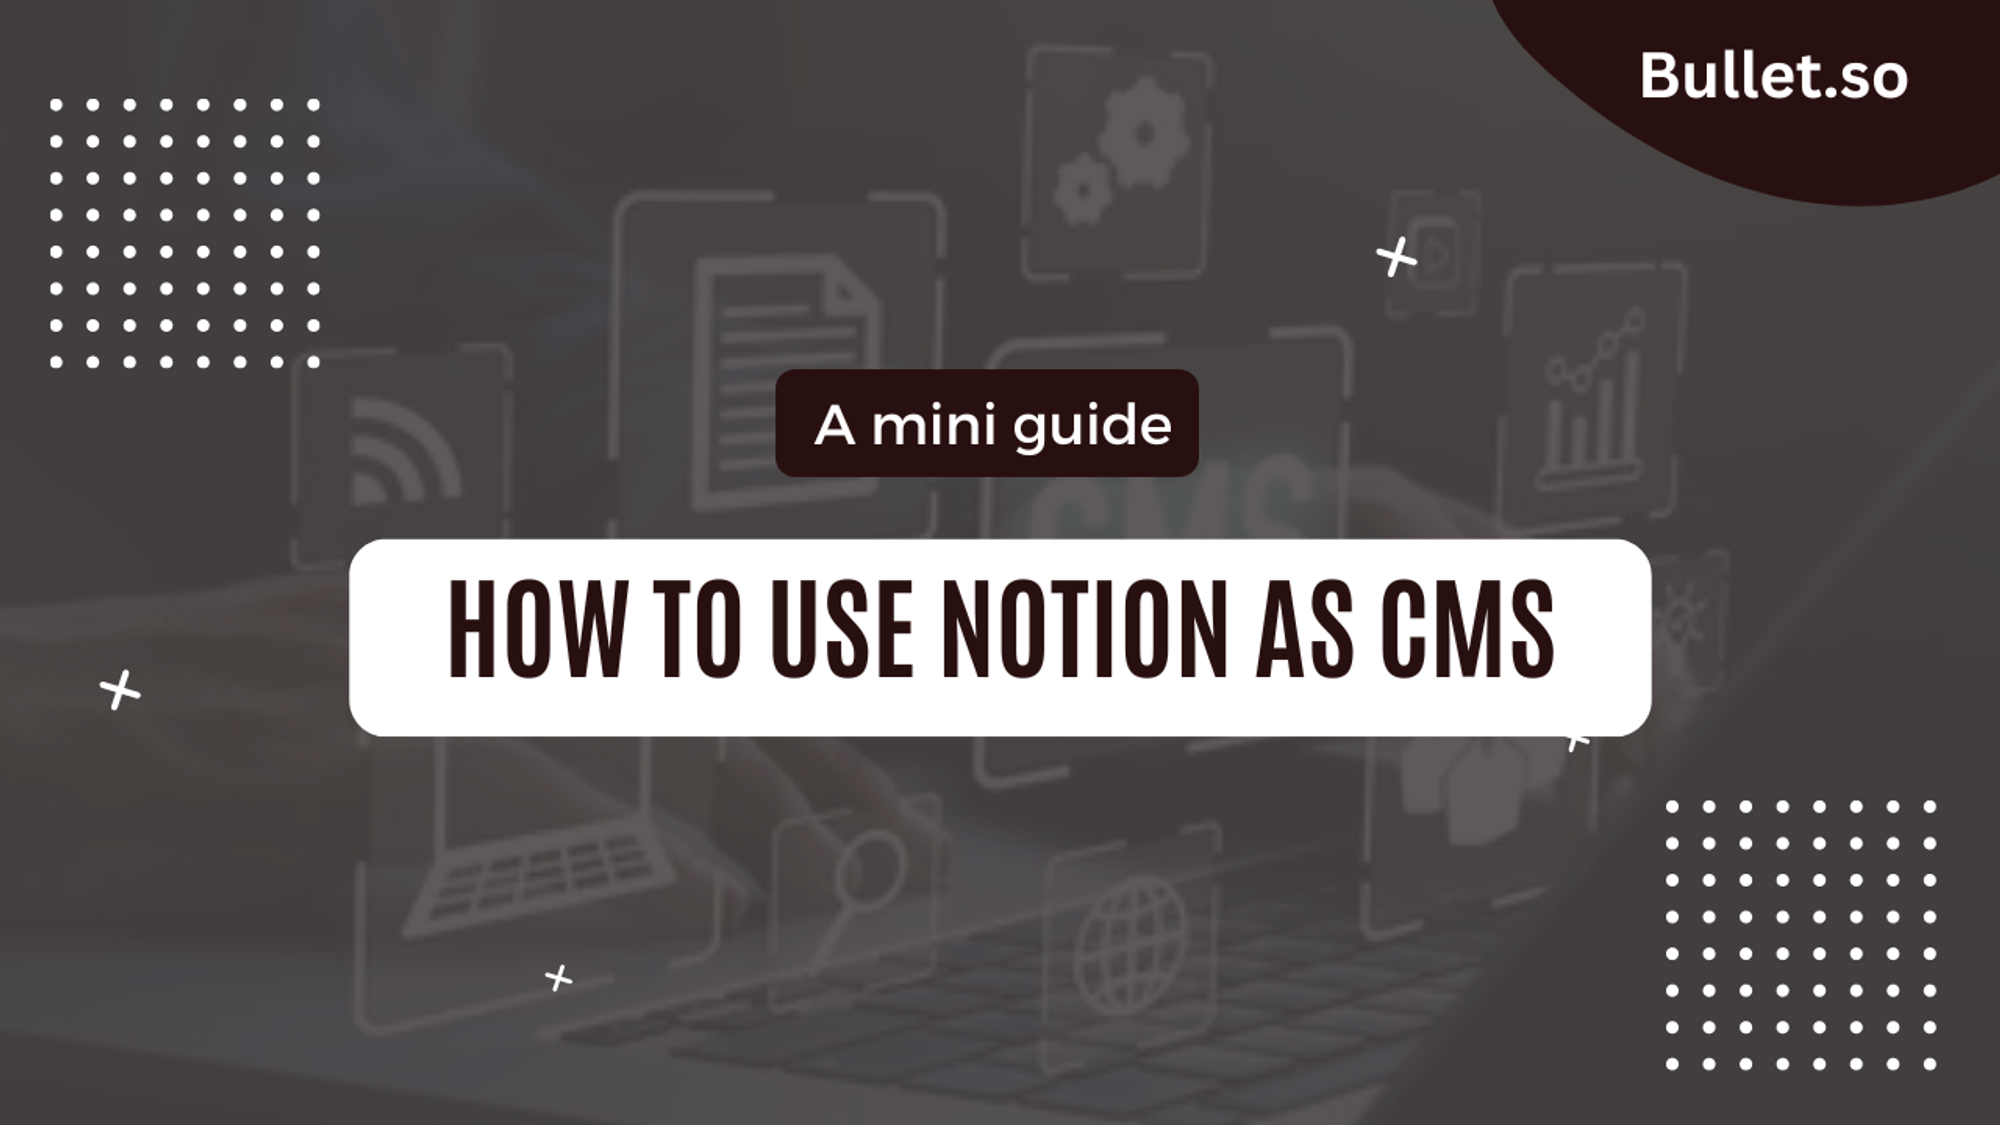 How to use Notion as CMS?